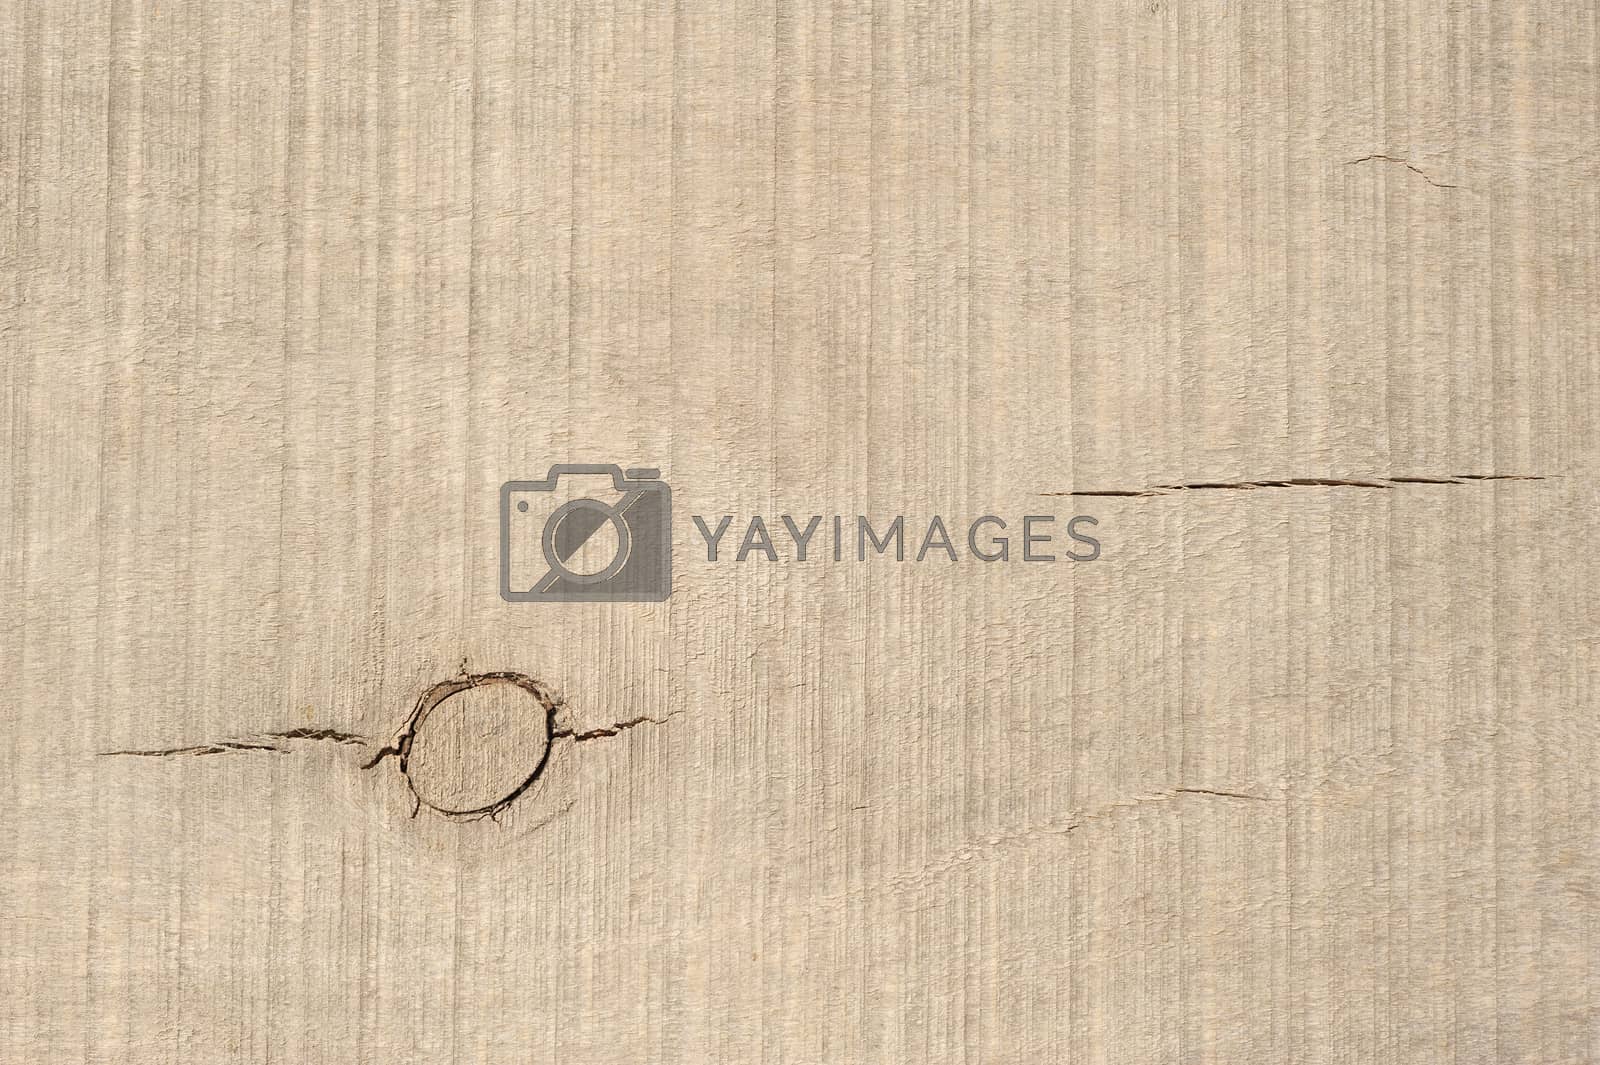 Royalty free image of Sawn wood planks, texture with natural pattern by starush